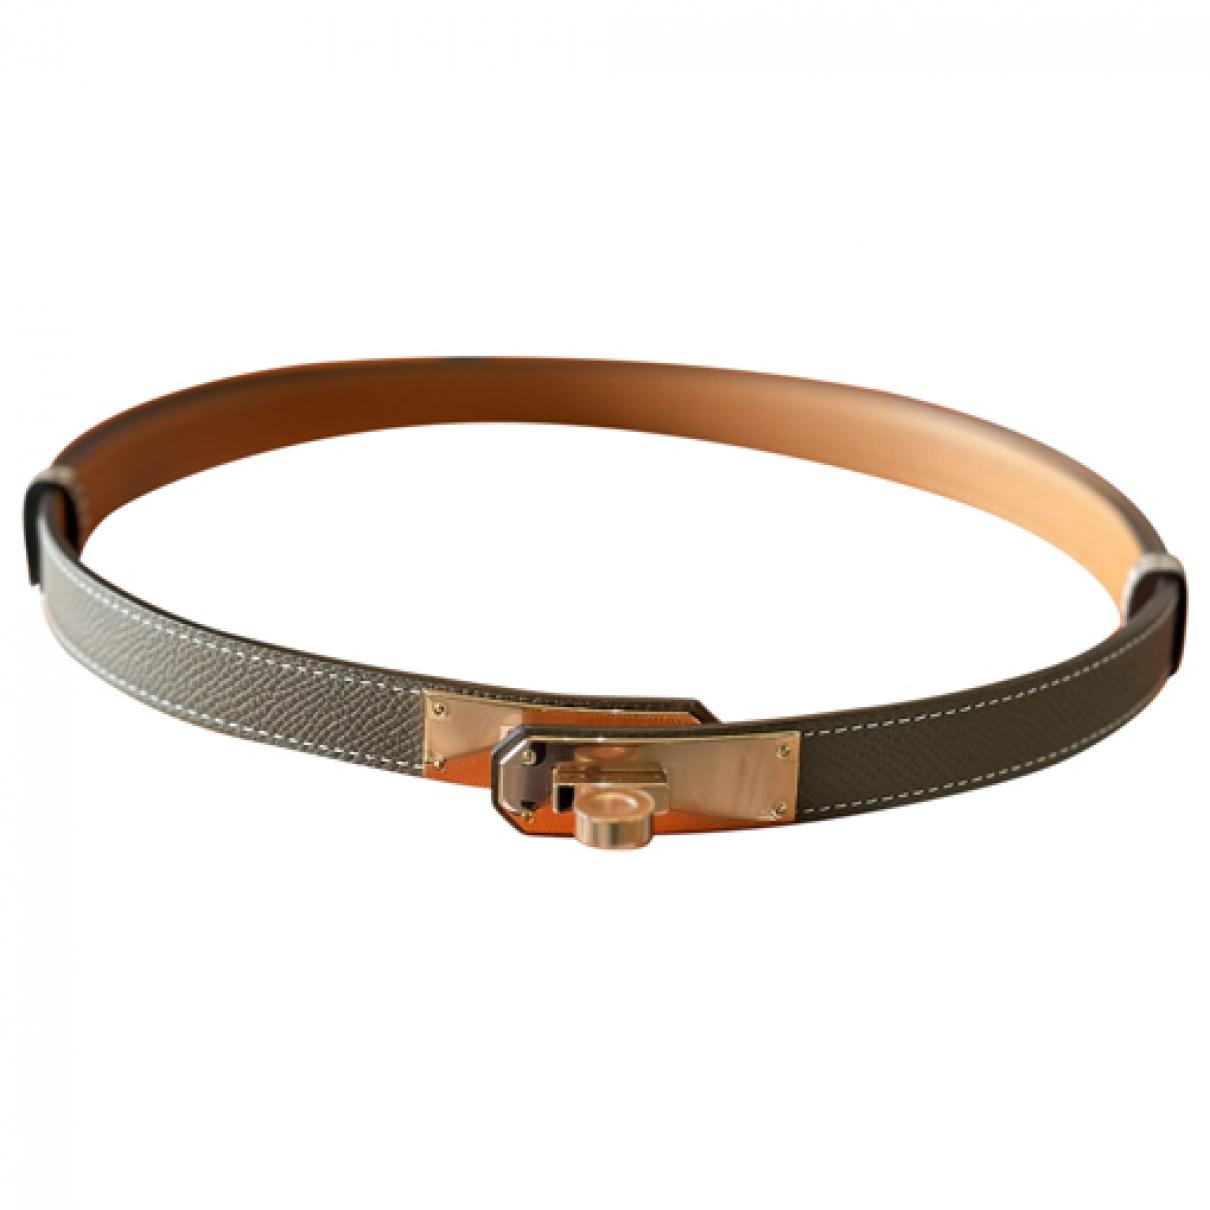 Hermès - Authenticated Kelly Belt - Leather Grey Plain for Women, Never Worn, with Tag